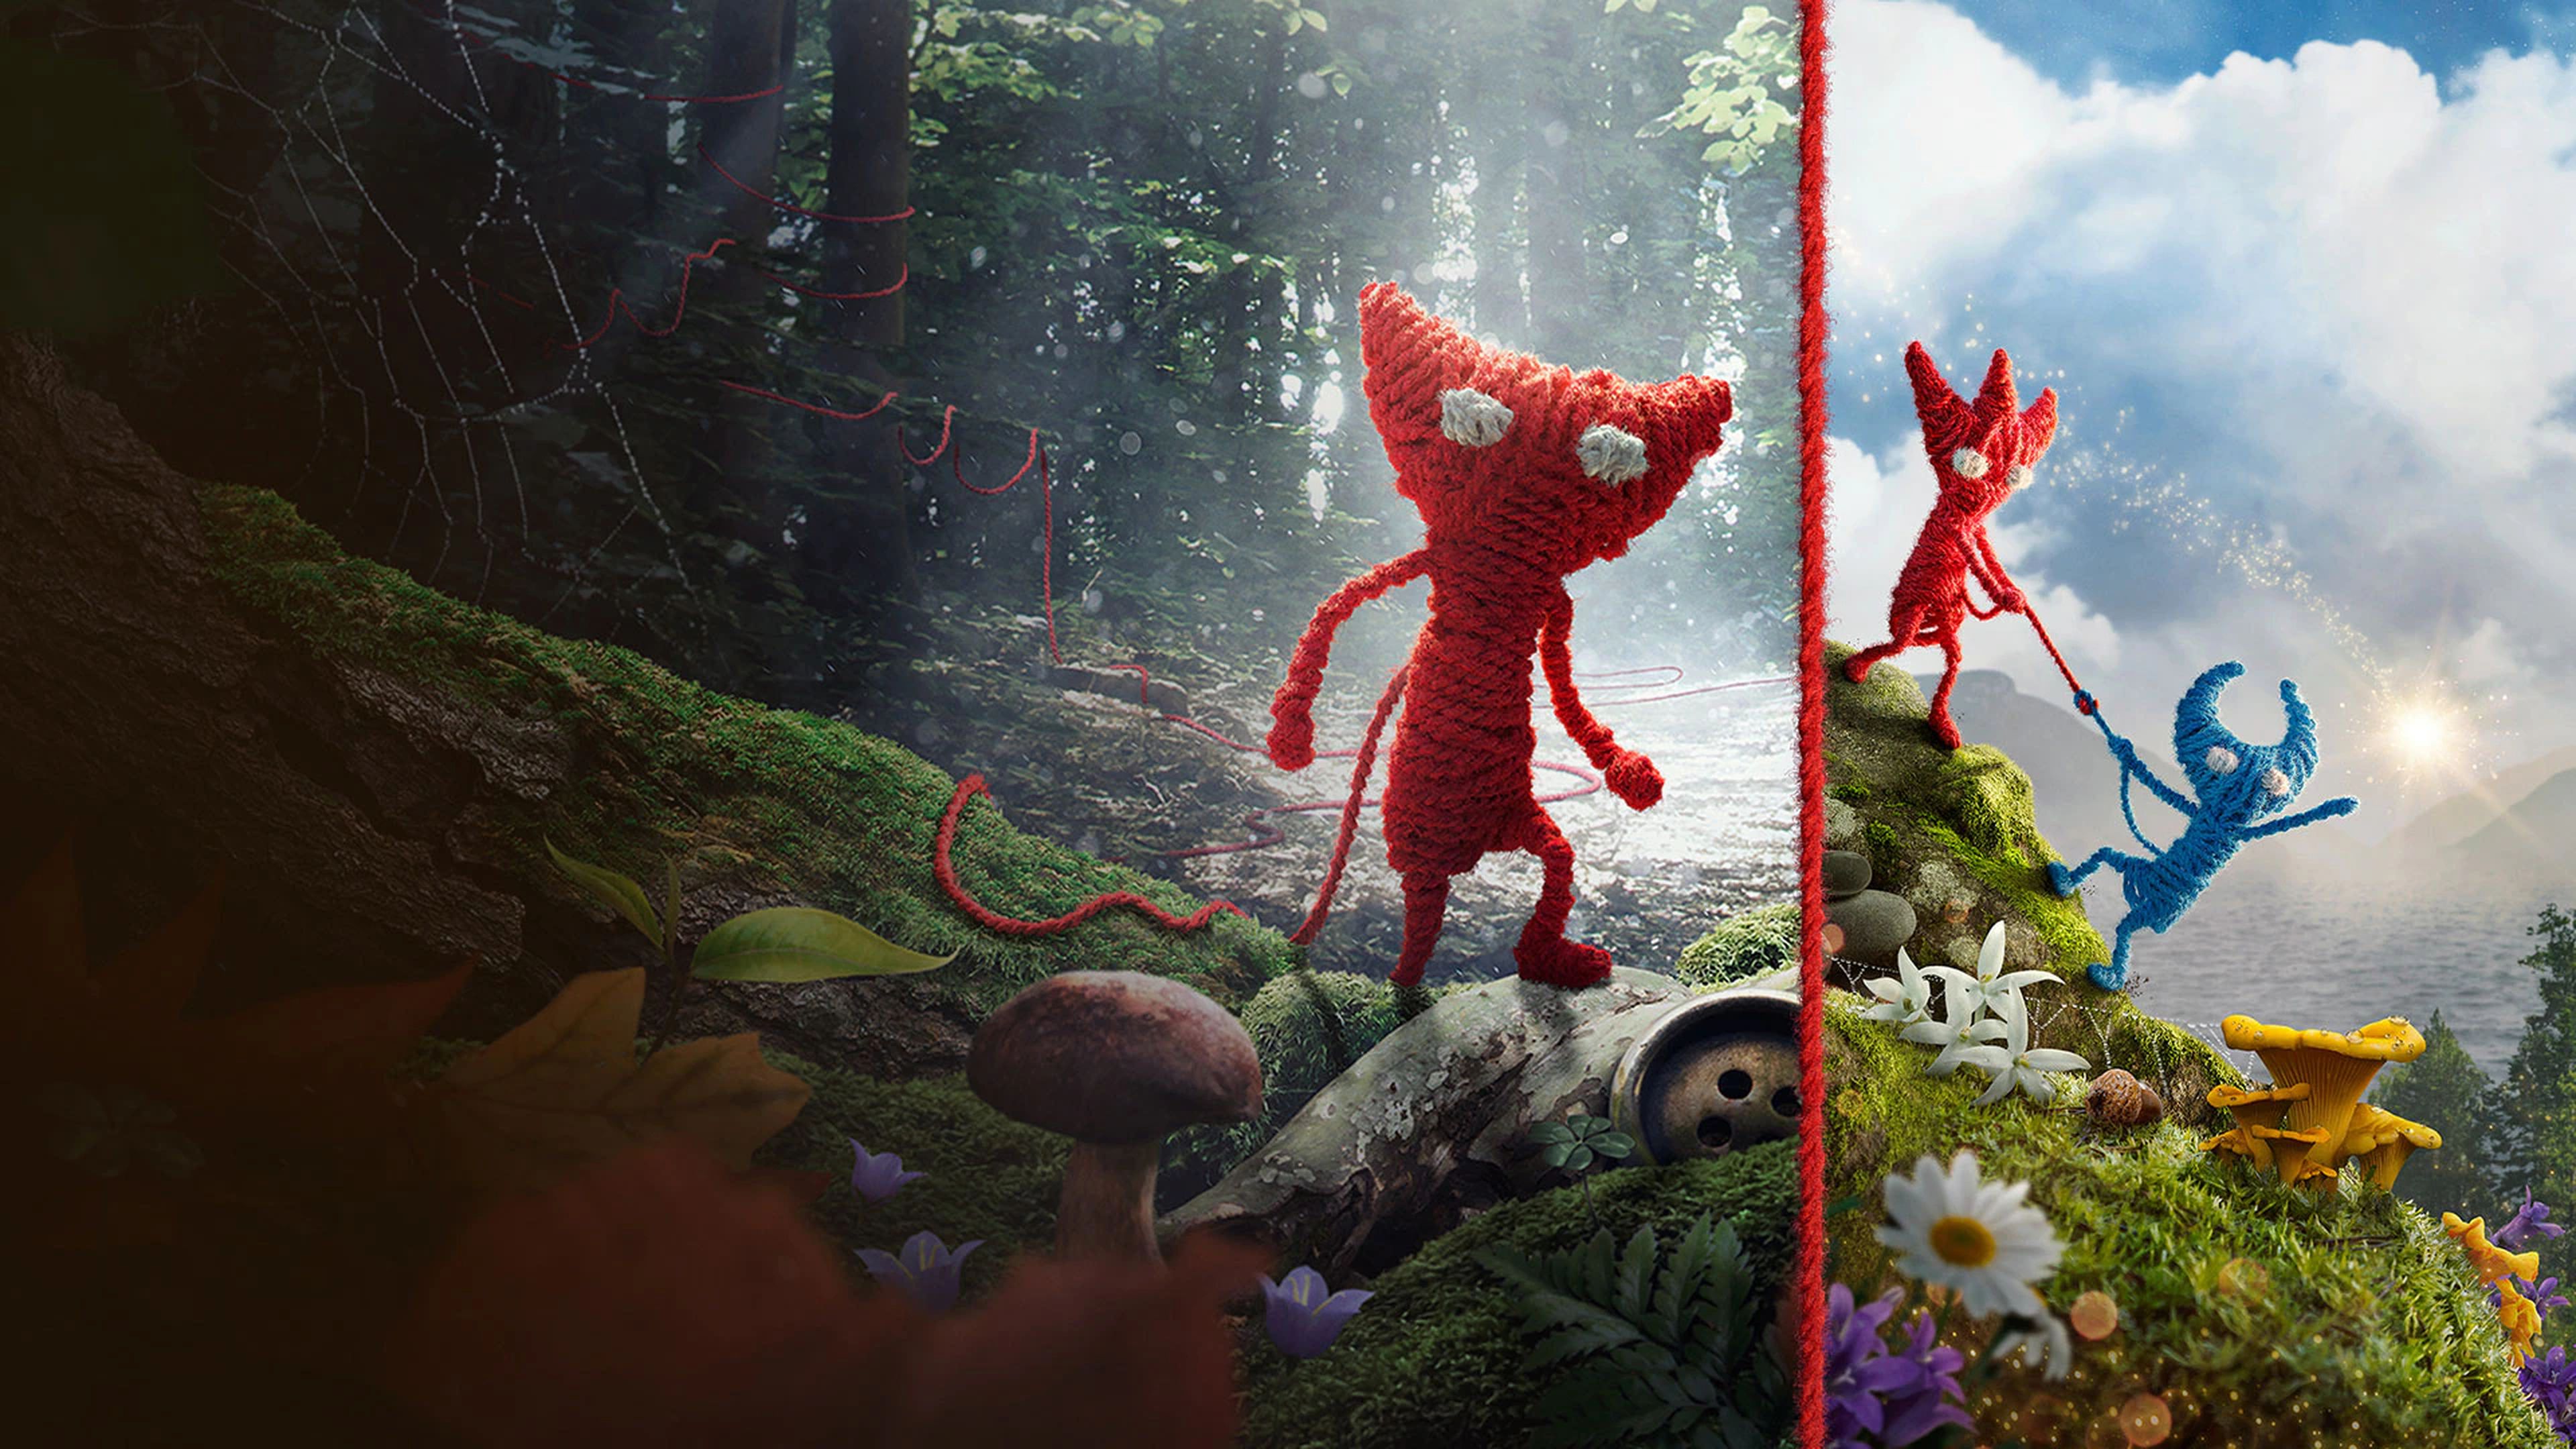 Unravel купить ps4. Unravel 2 ps4. Unravel two ps4. Unravel Yarny Bundle. Unravel two диск.